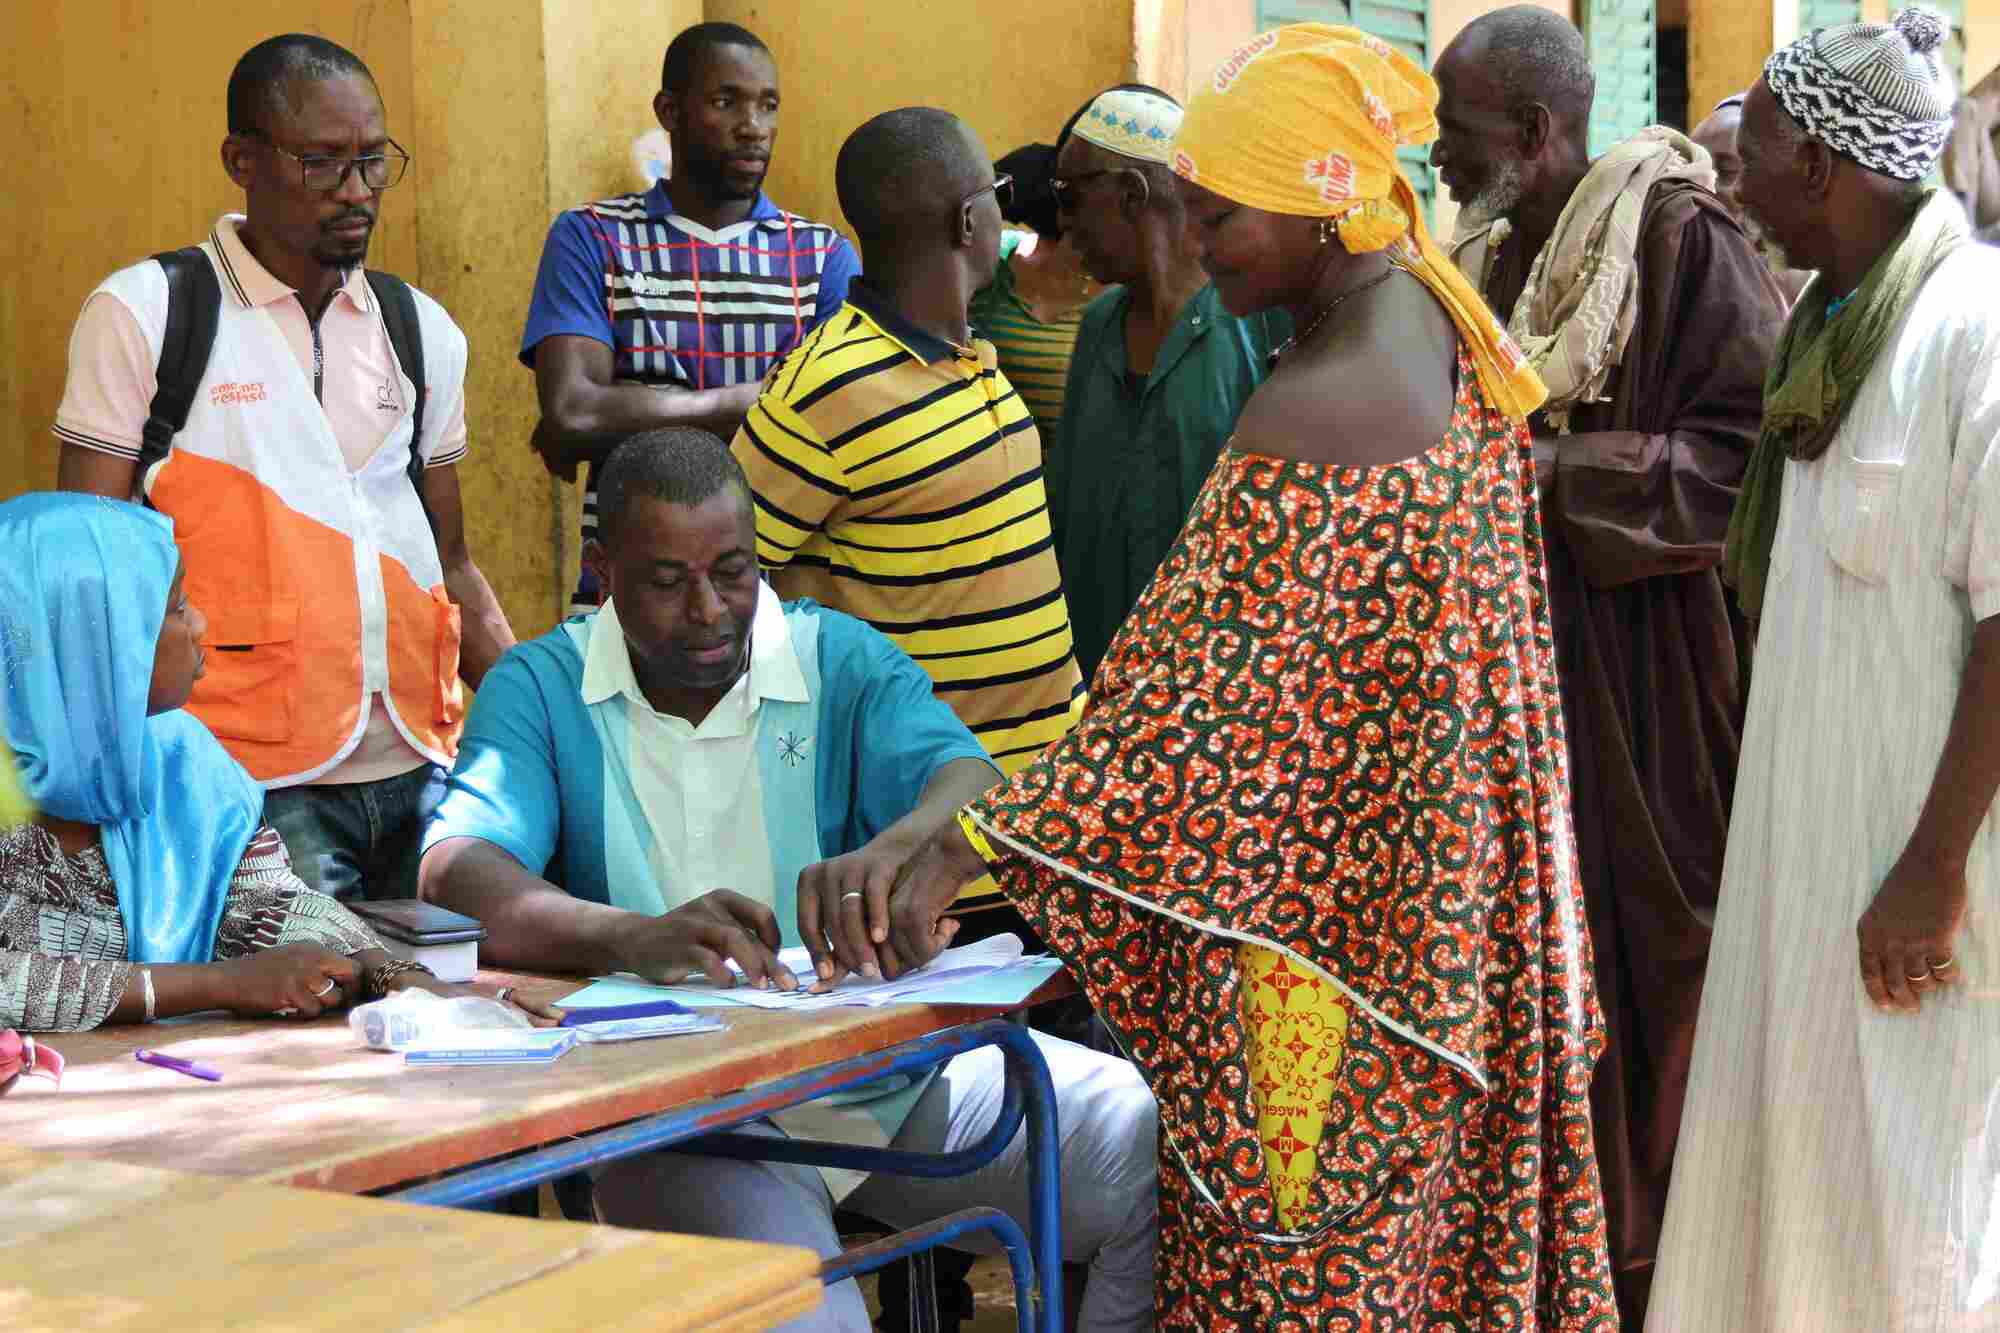 In Mali, World Vision staff assist local community members to receive their cash distribution at a table.  